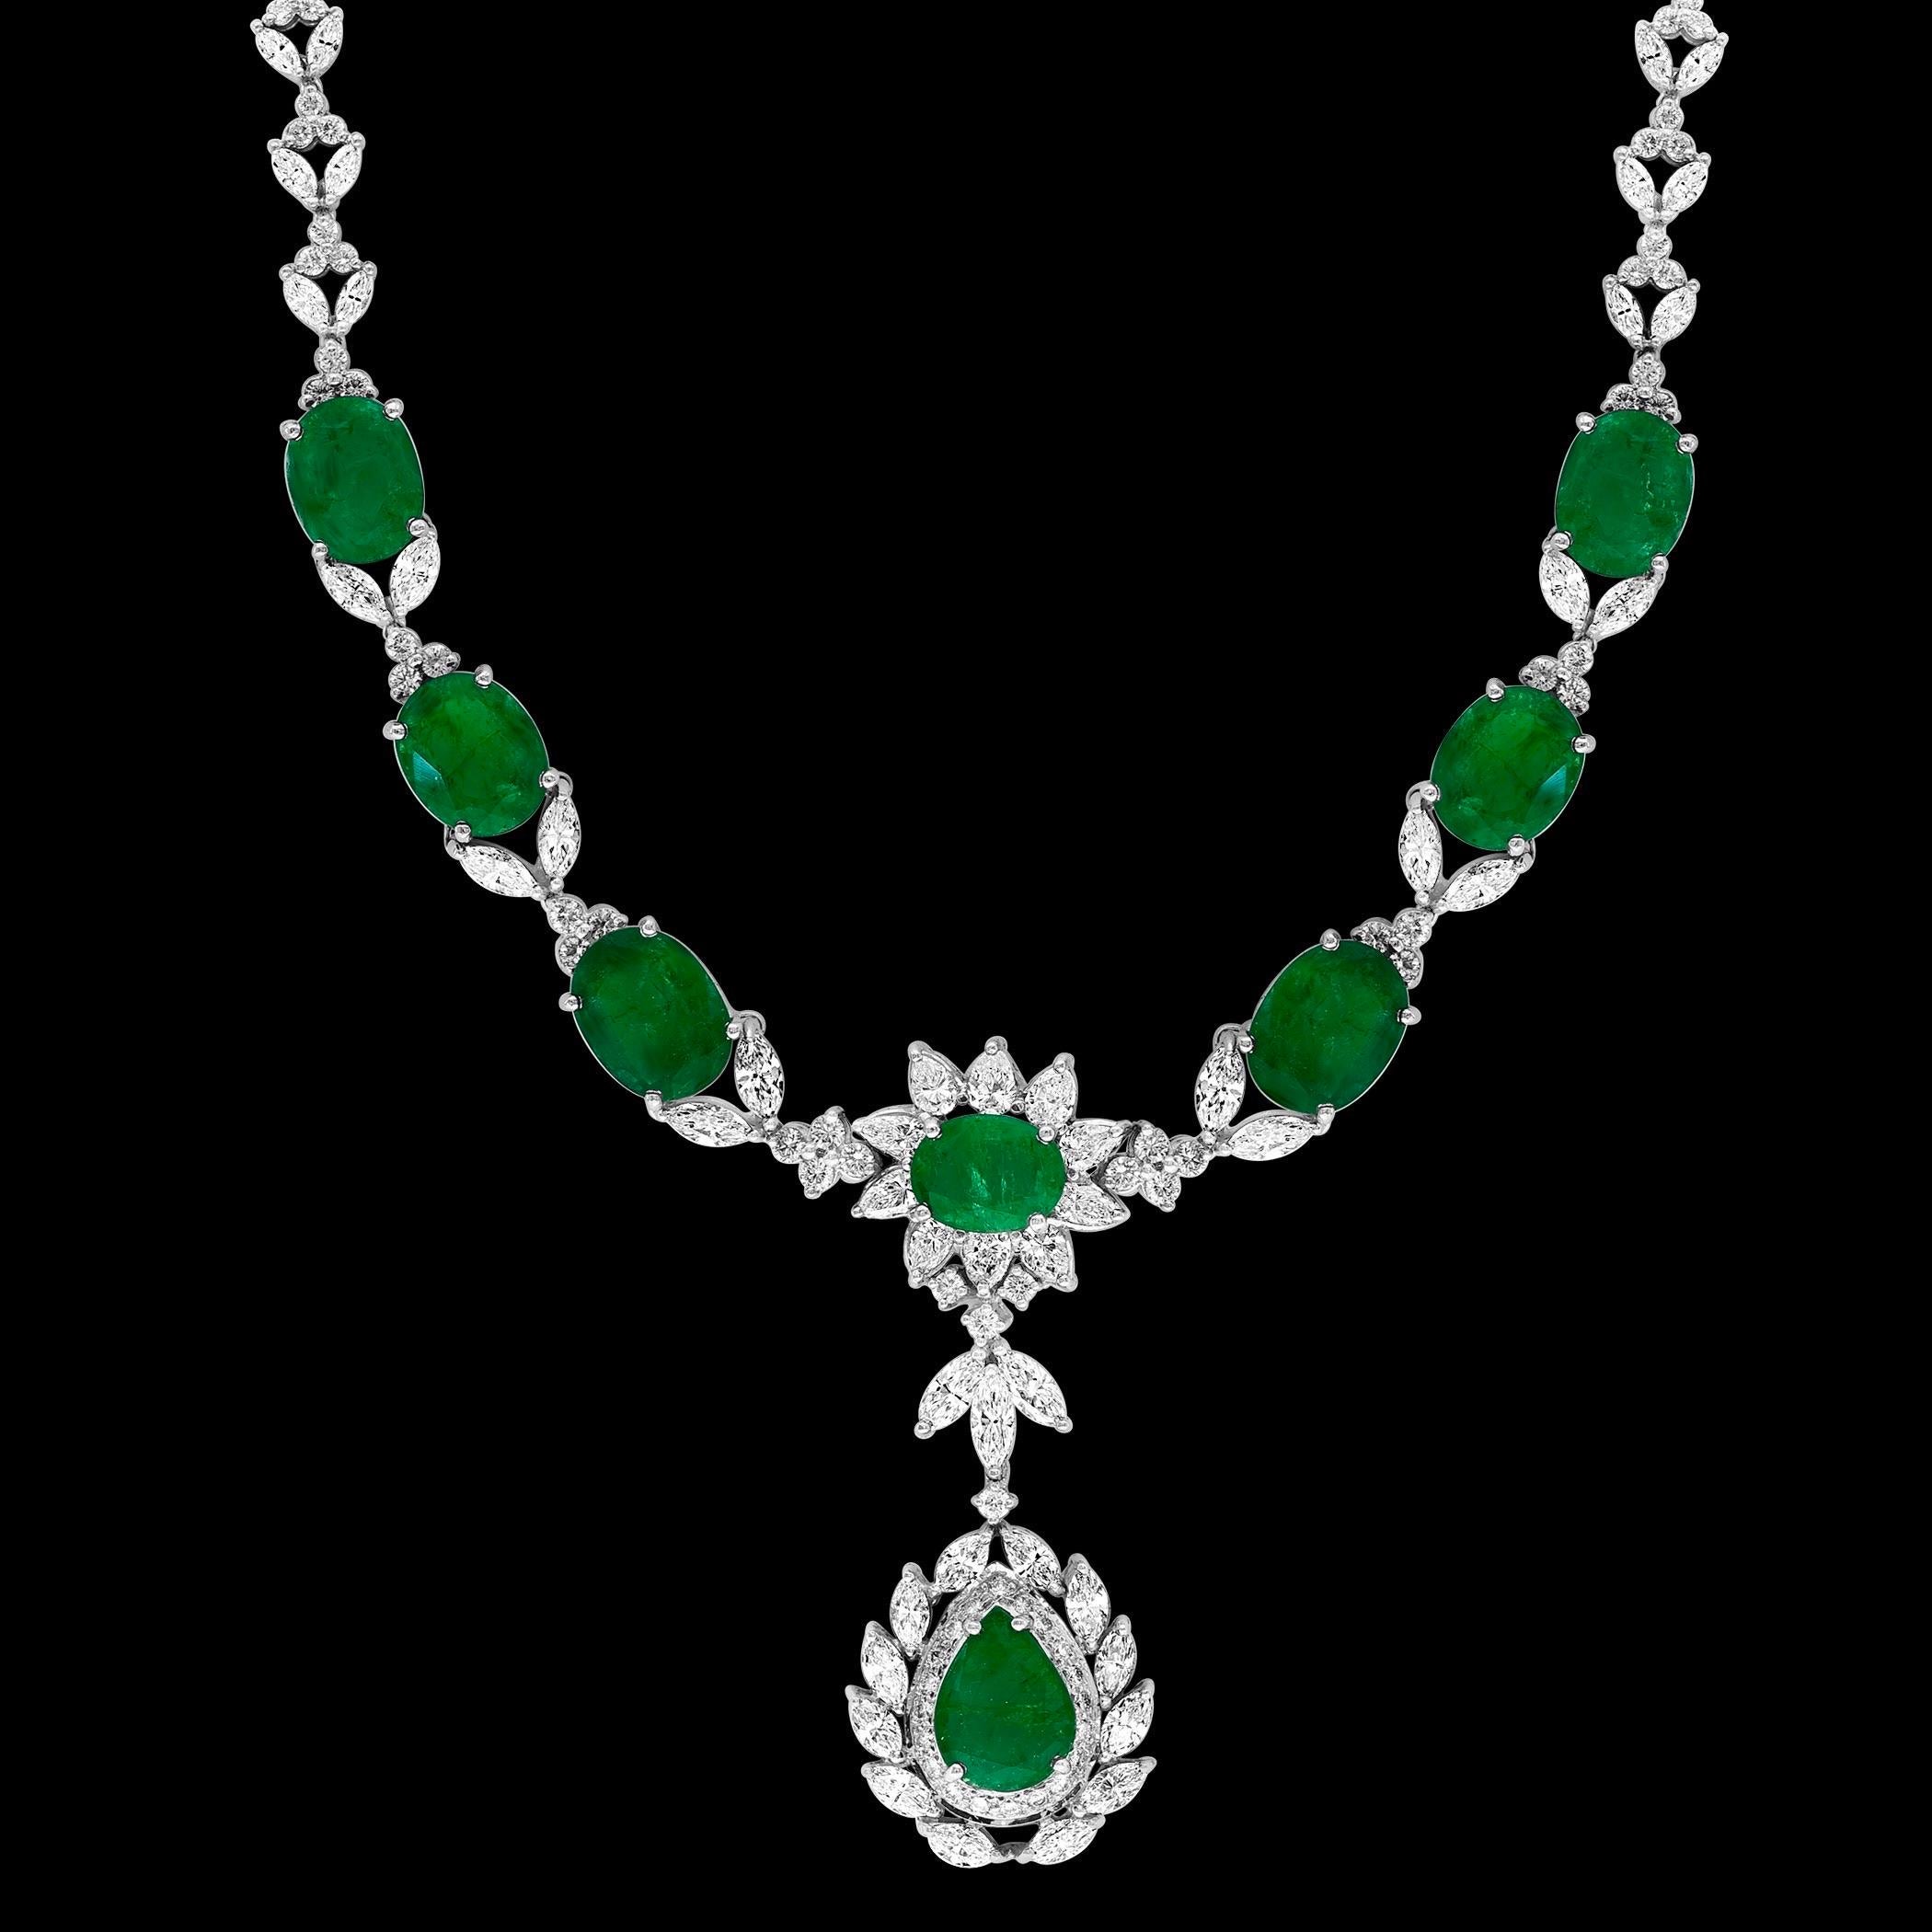 GIA Certified 56 Ct Zambian Emerald & 38 Ct Diamond Fringe Necklace 18KWG Bridal For Sale 9